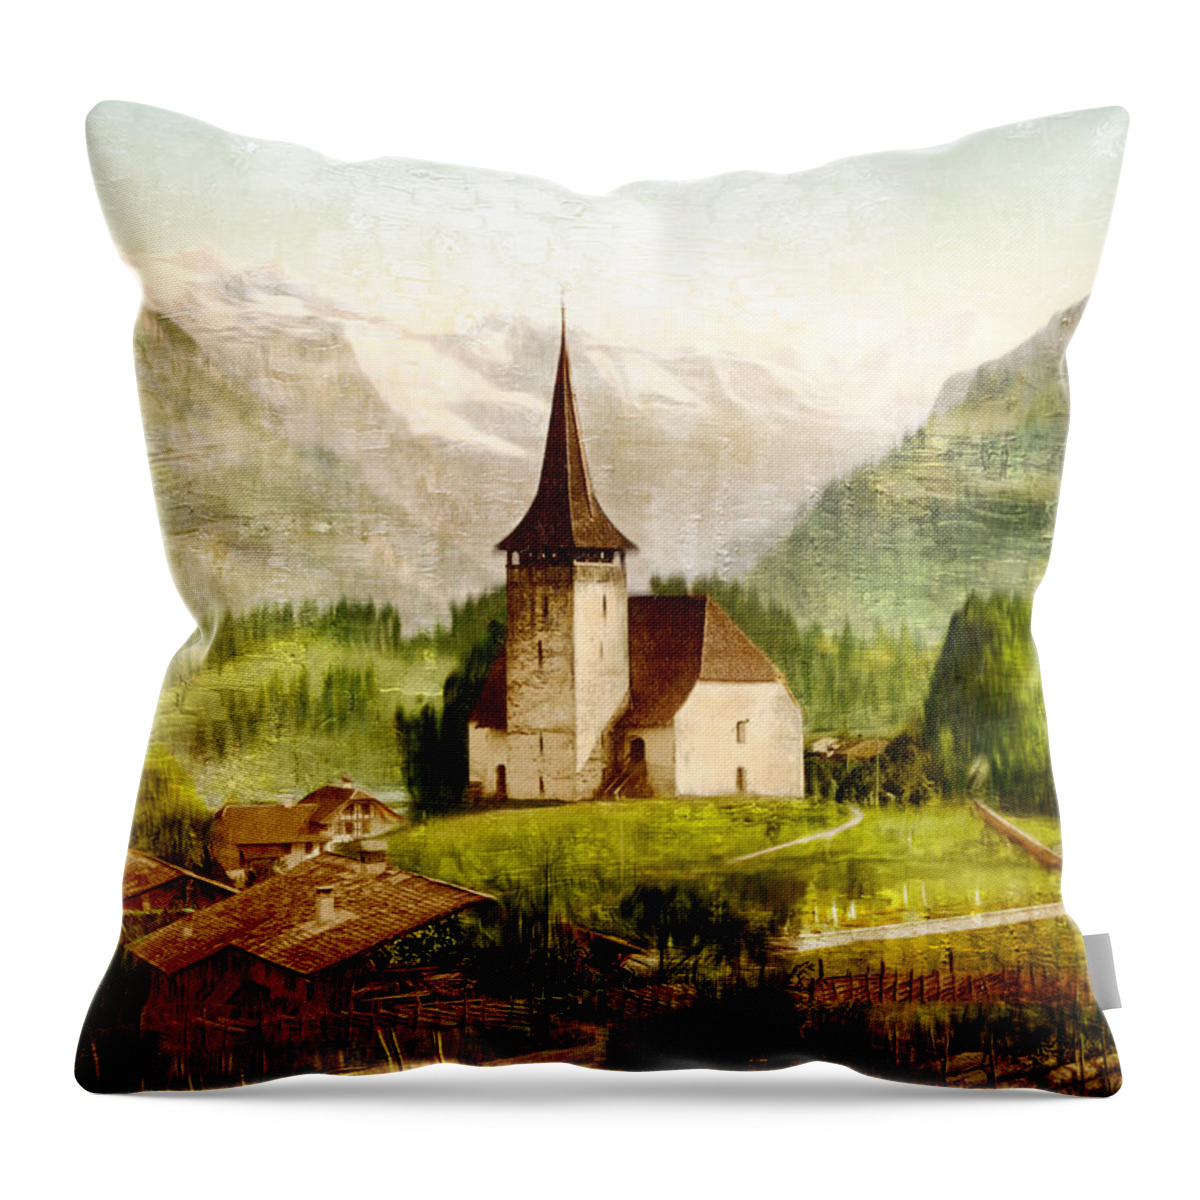 Church In The Alps Throw Pillow featuring the photograph CHURCH iN THE ALPS by Carlos Diaz